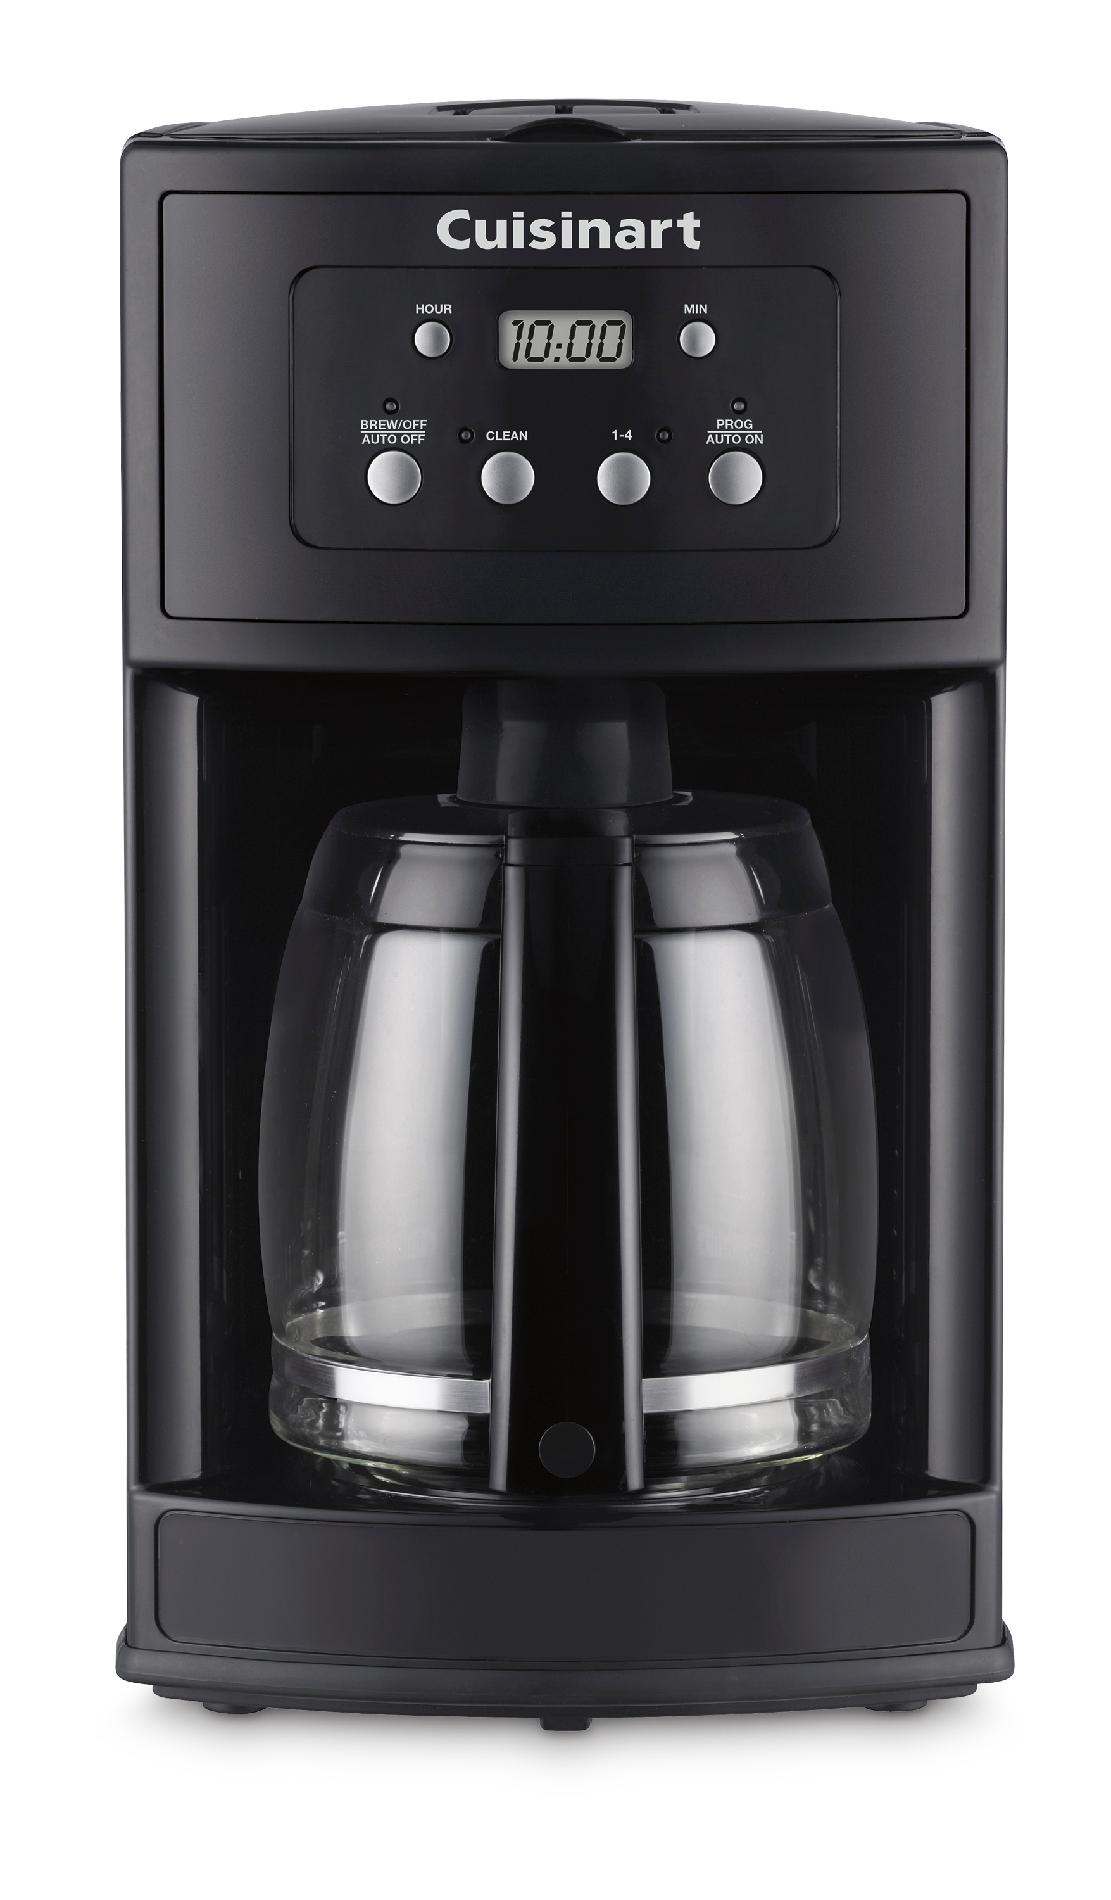 Cuisinart DCC-500 12-Cup Programmable Coffee Maker